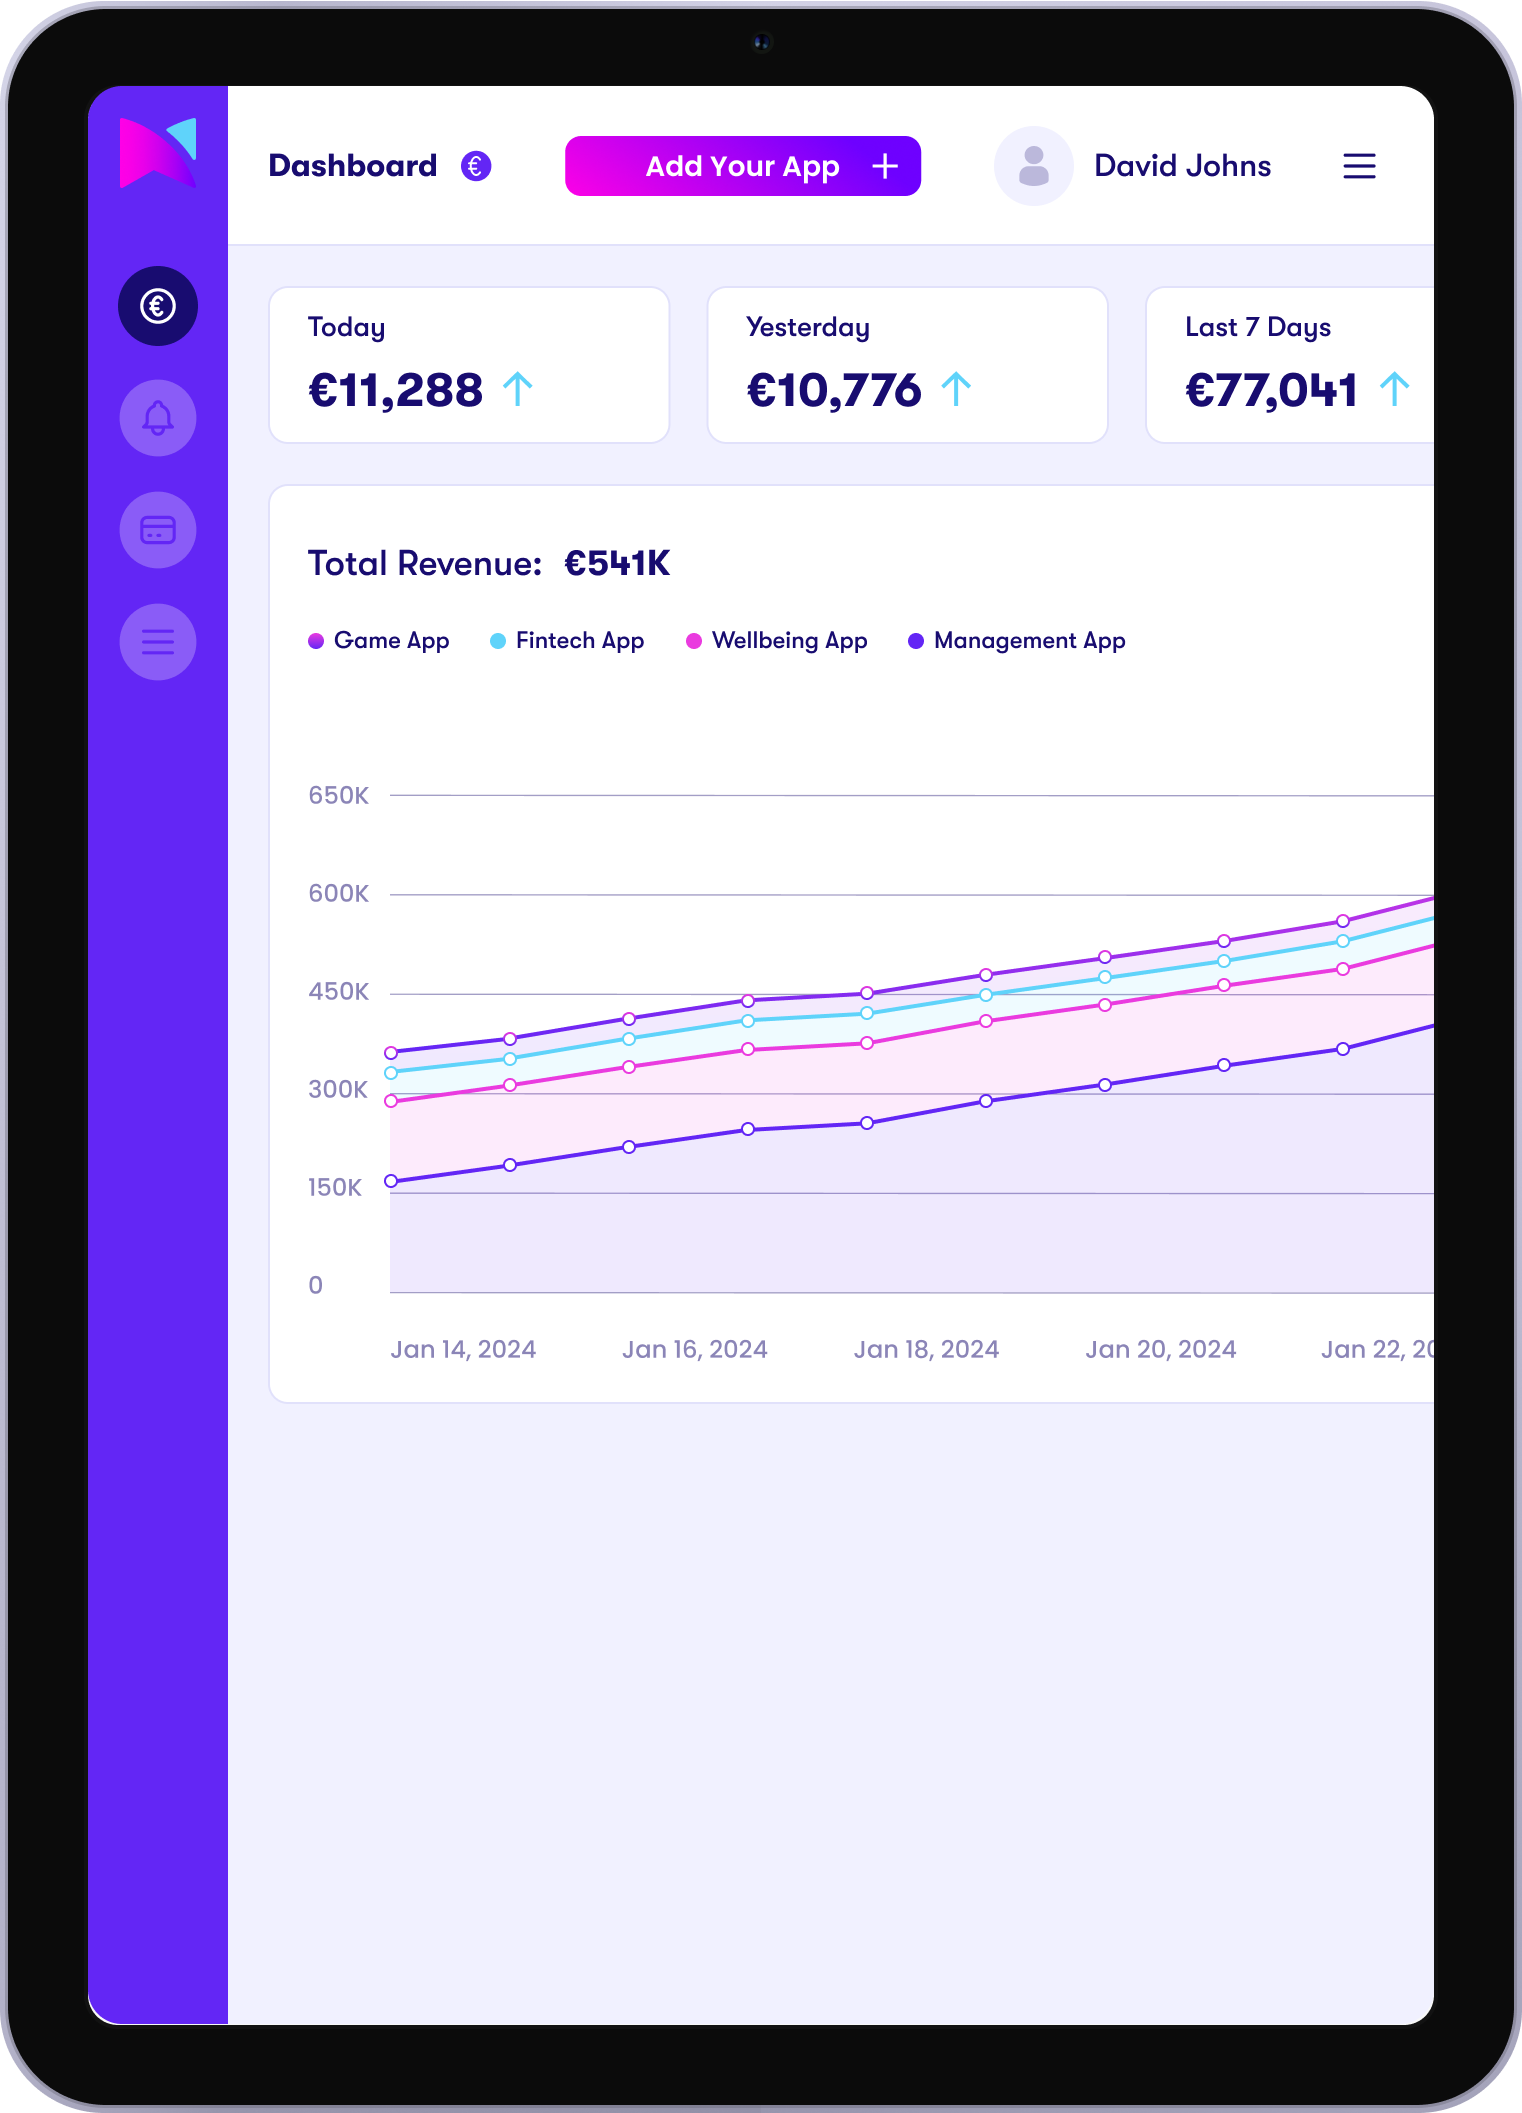 iPad showing Minutes App dashboard of revenue.